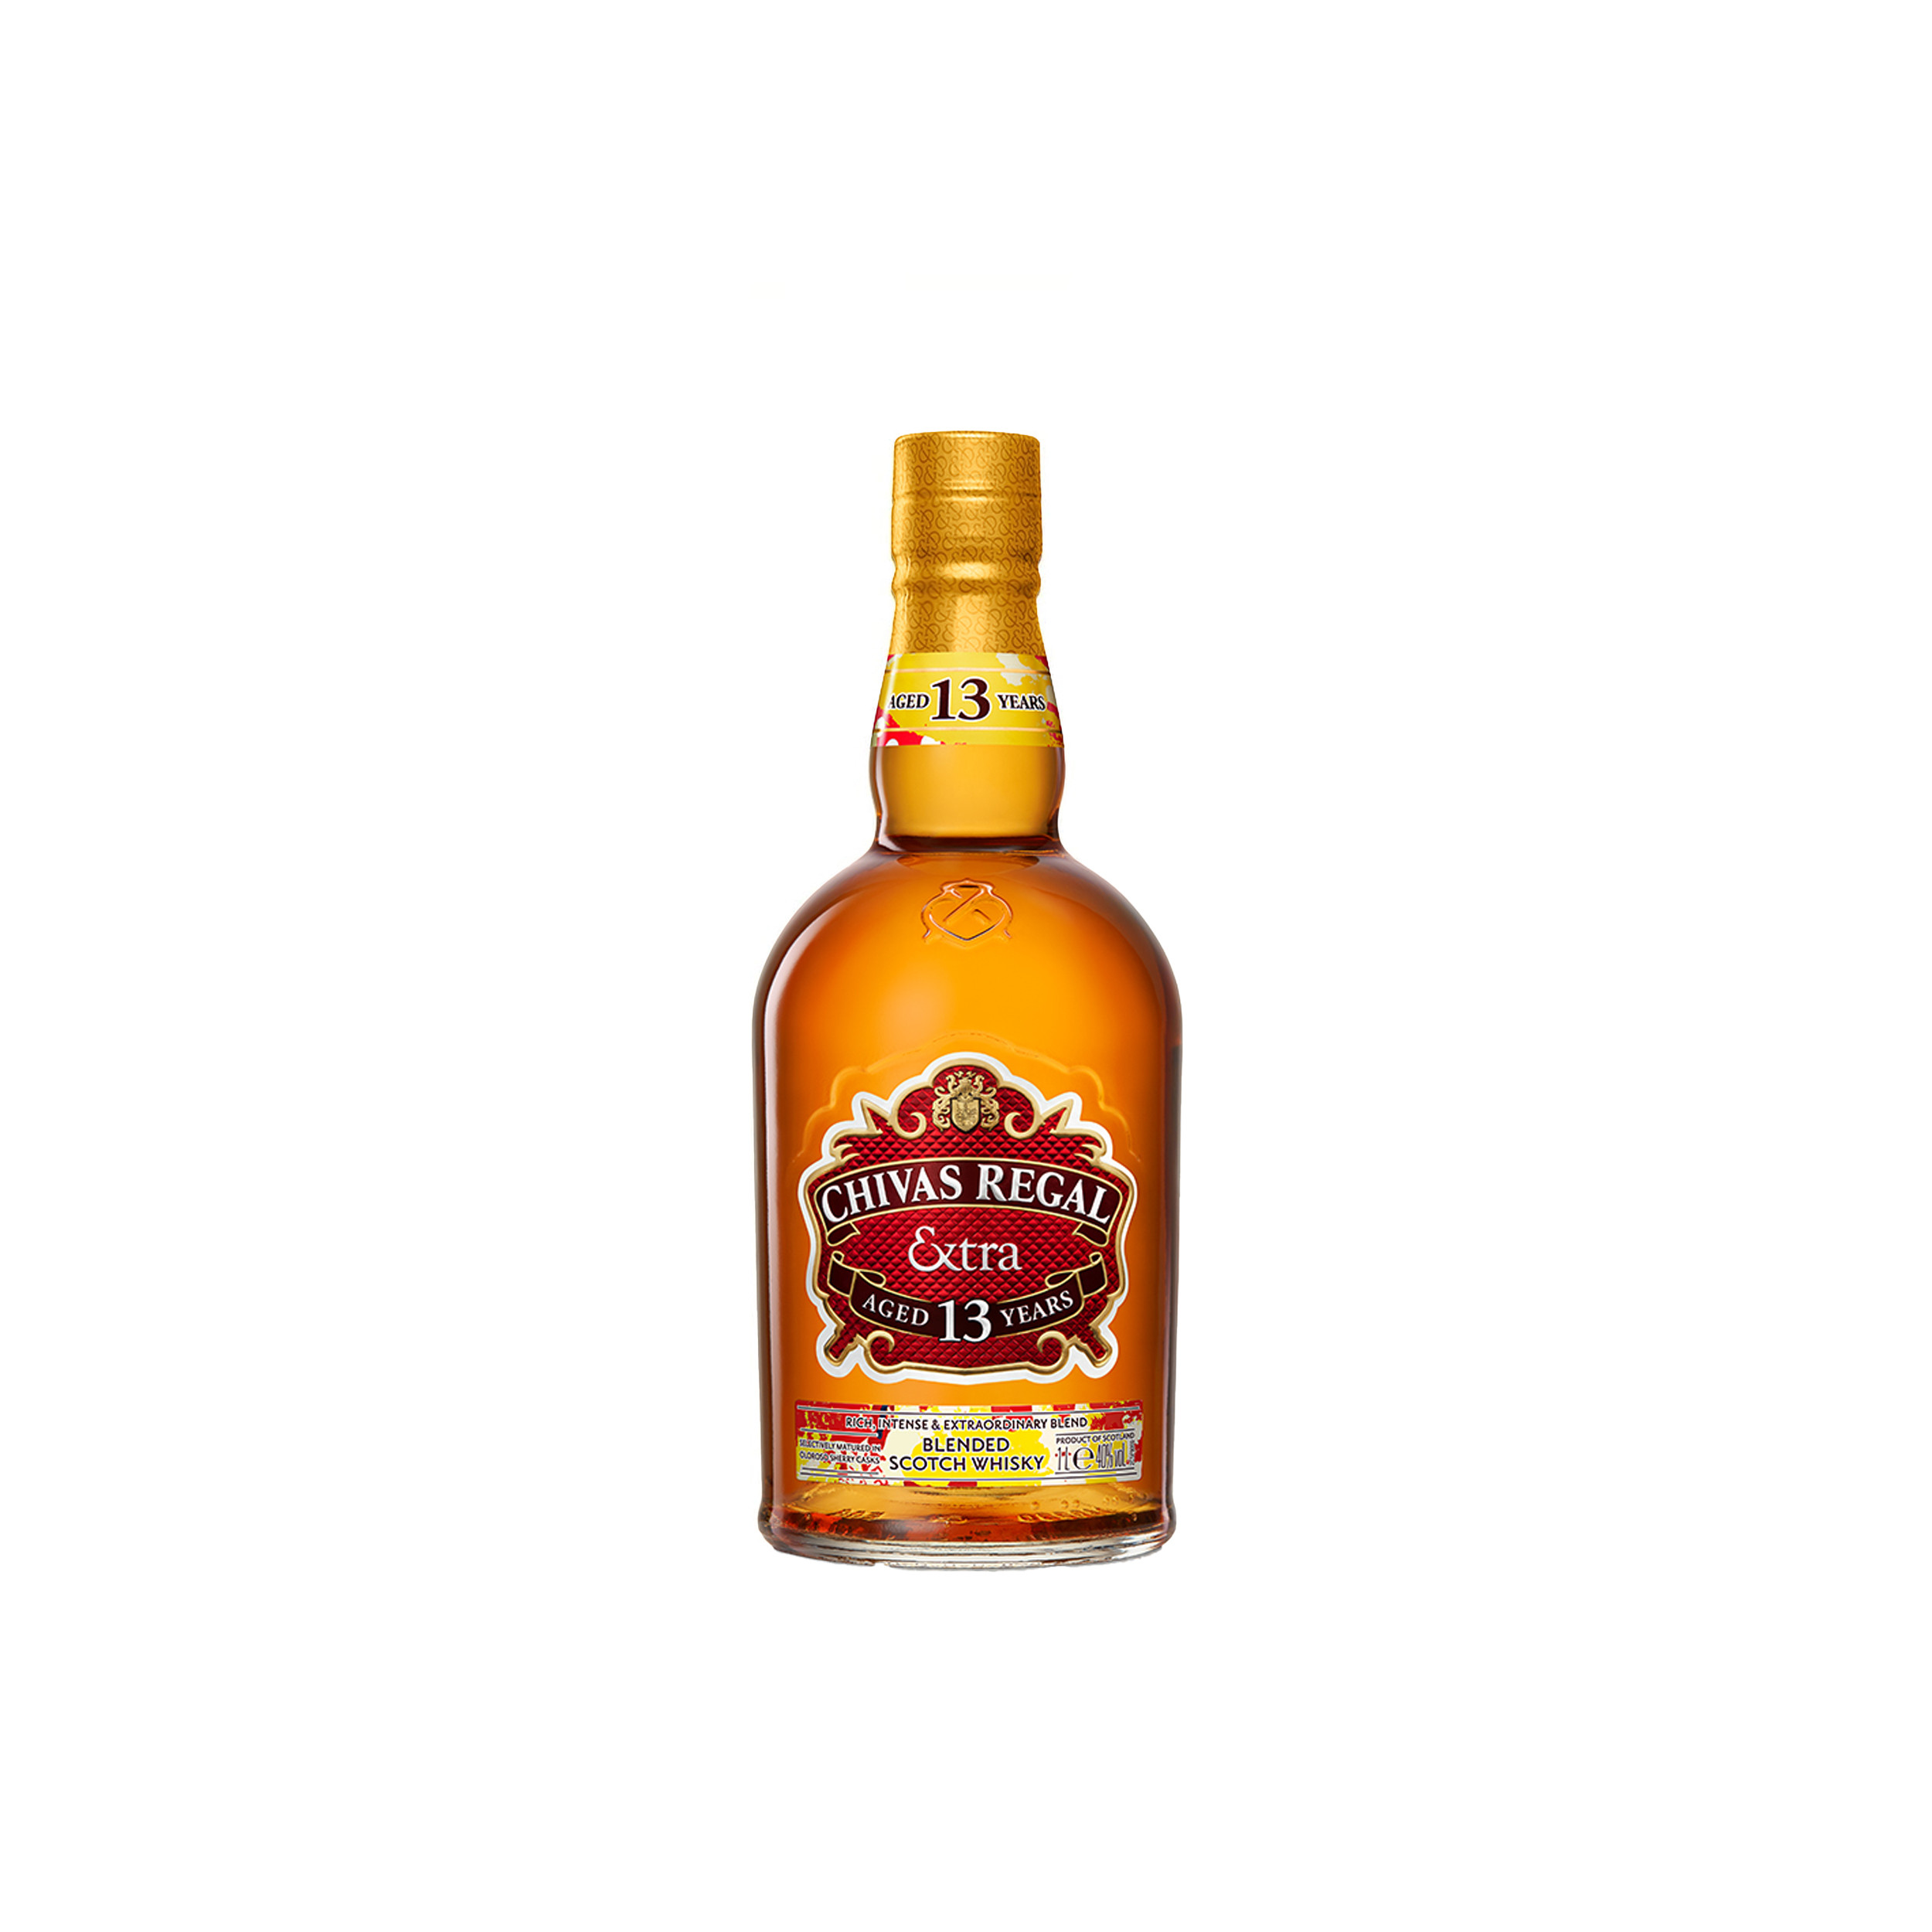 Chivas Regal 13 Years Sherry Cask Whisky